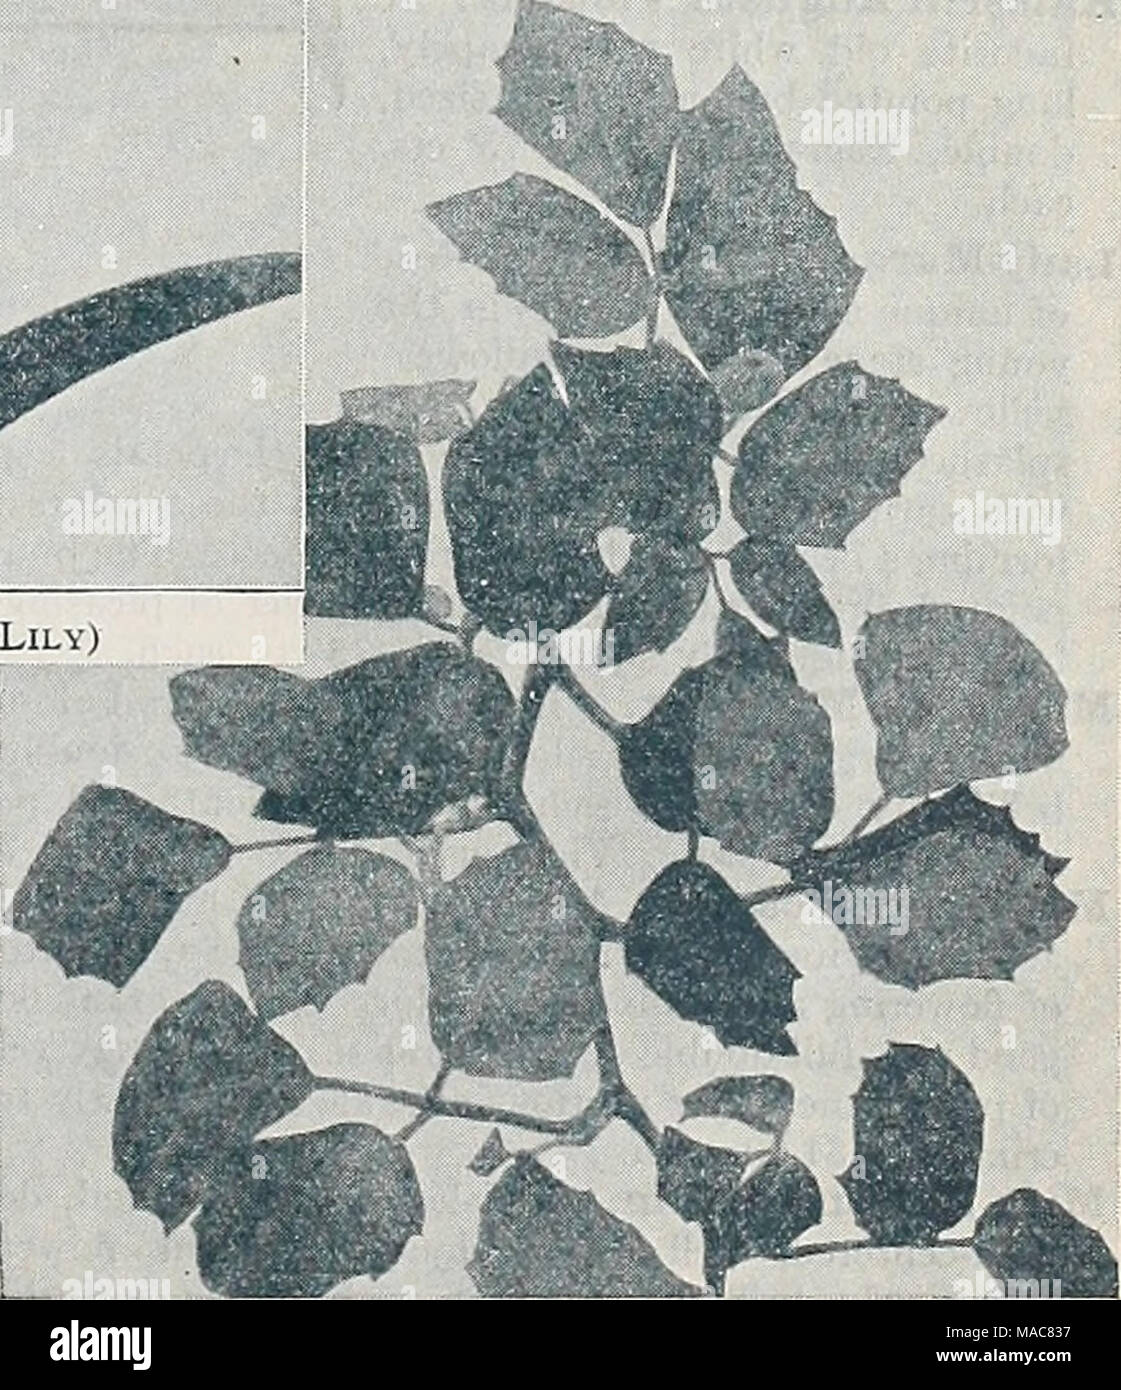 . Dreer's midsummer list 1933 . ViTis (Cissus) Rhombifolia (Grape Ivy) Our Autumn Catalogue ready September First will offer a complete line of Decorative and Flowering Plants for the House and Conservatory Stock Photo